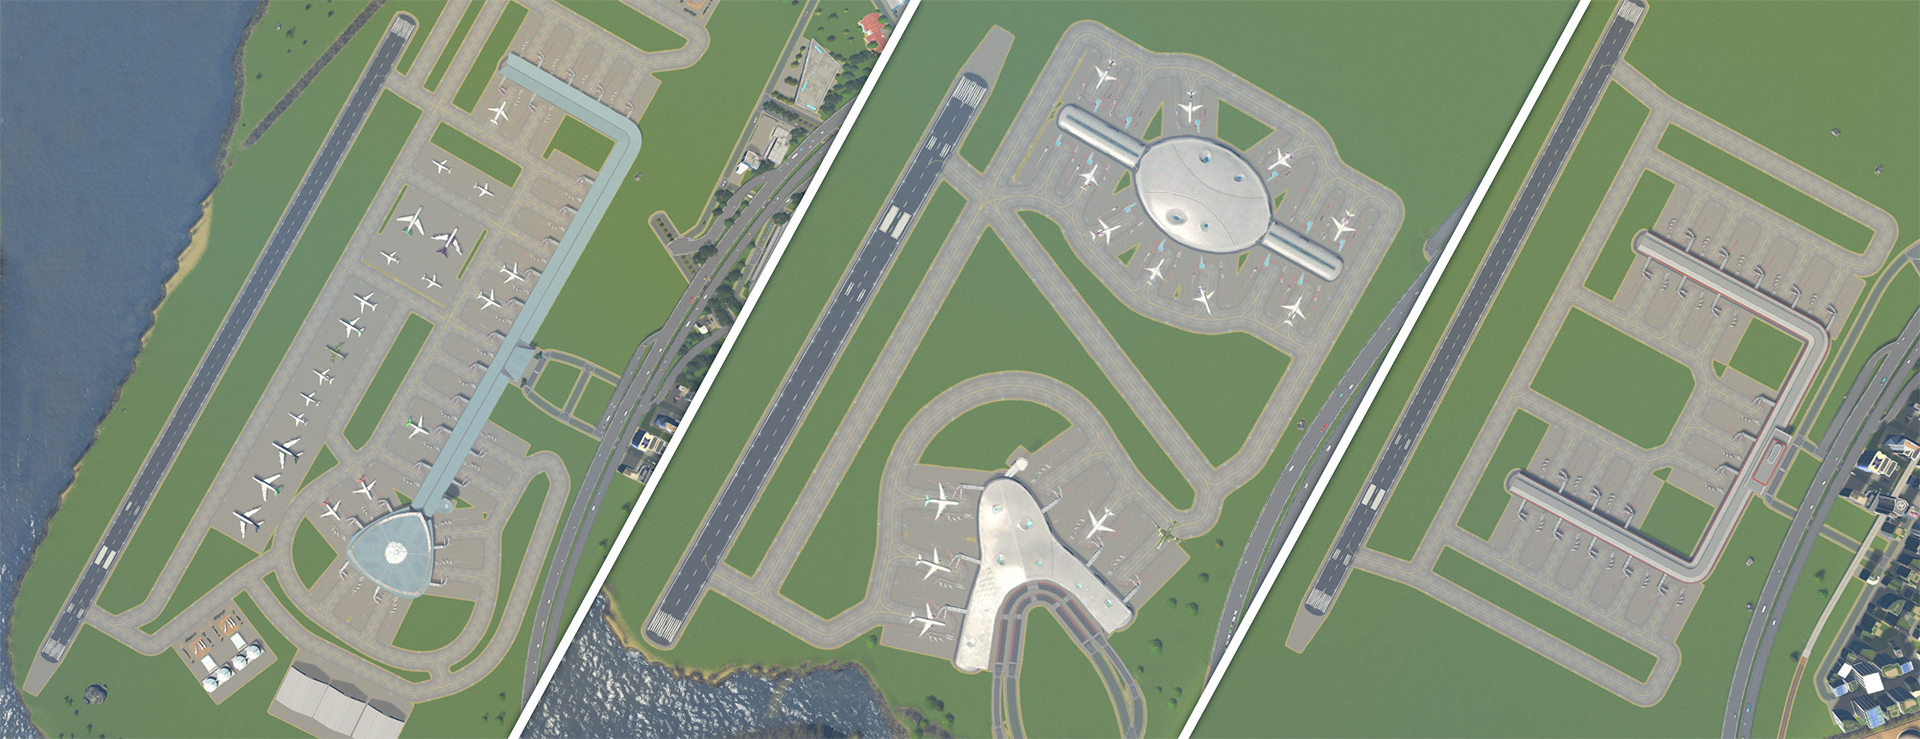 Cities: Skylines Airport expansion adds 14 new trees to the game